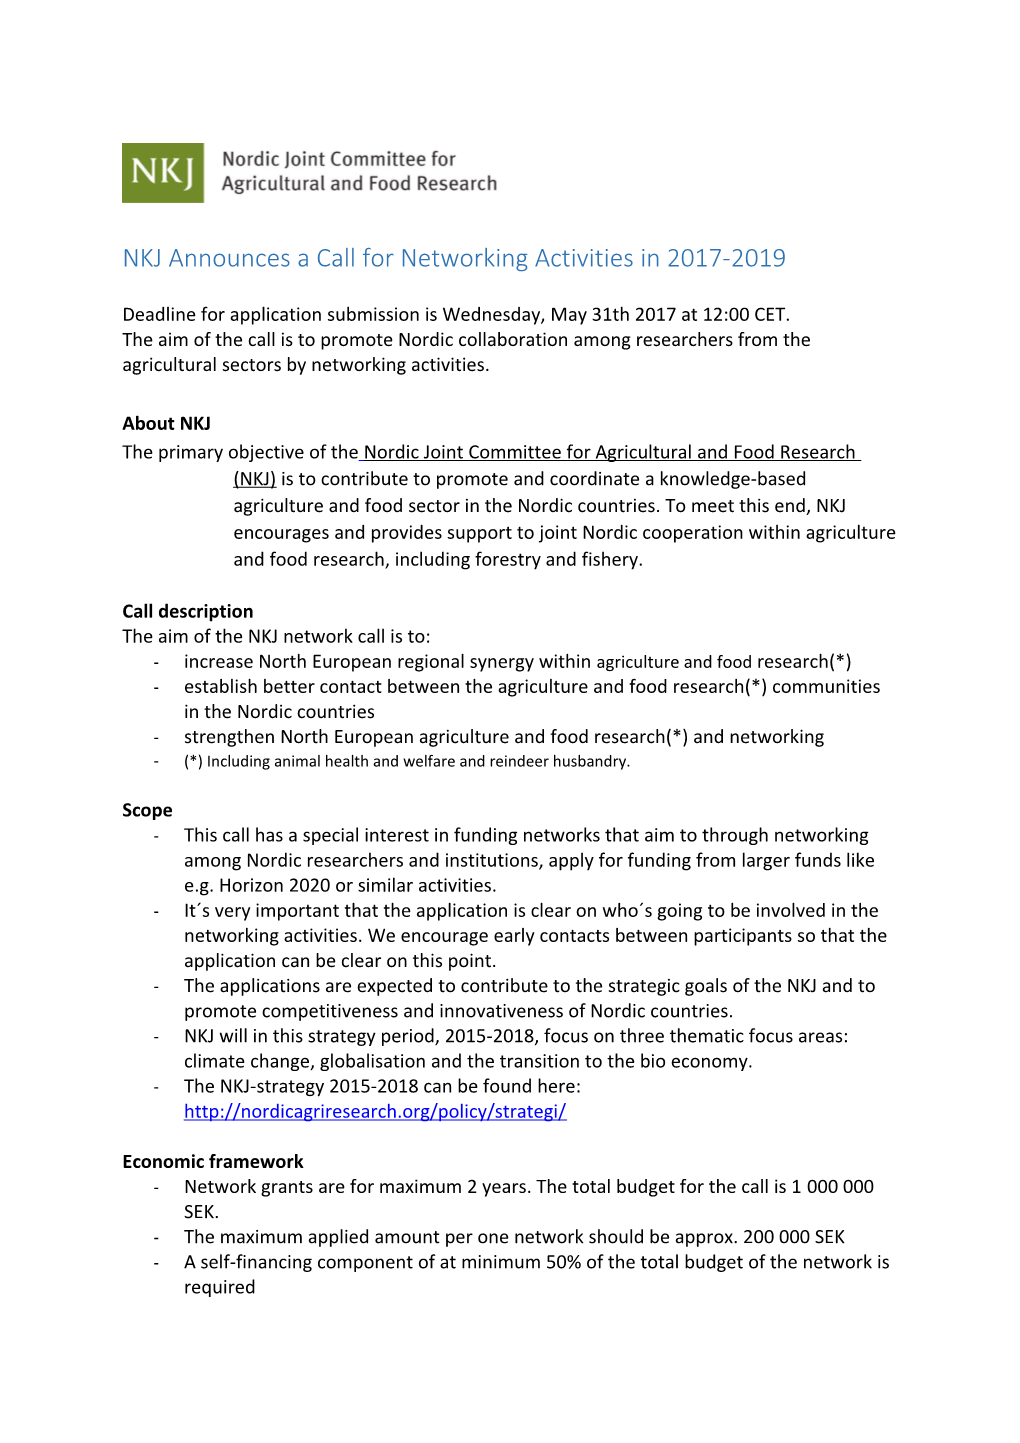 NKJ Announces a Call for Networking Activities in 2017-2019